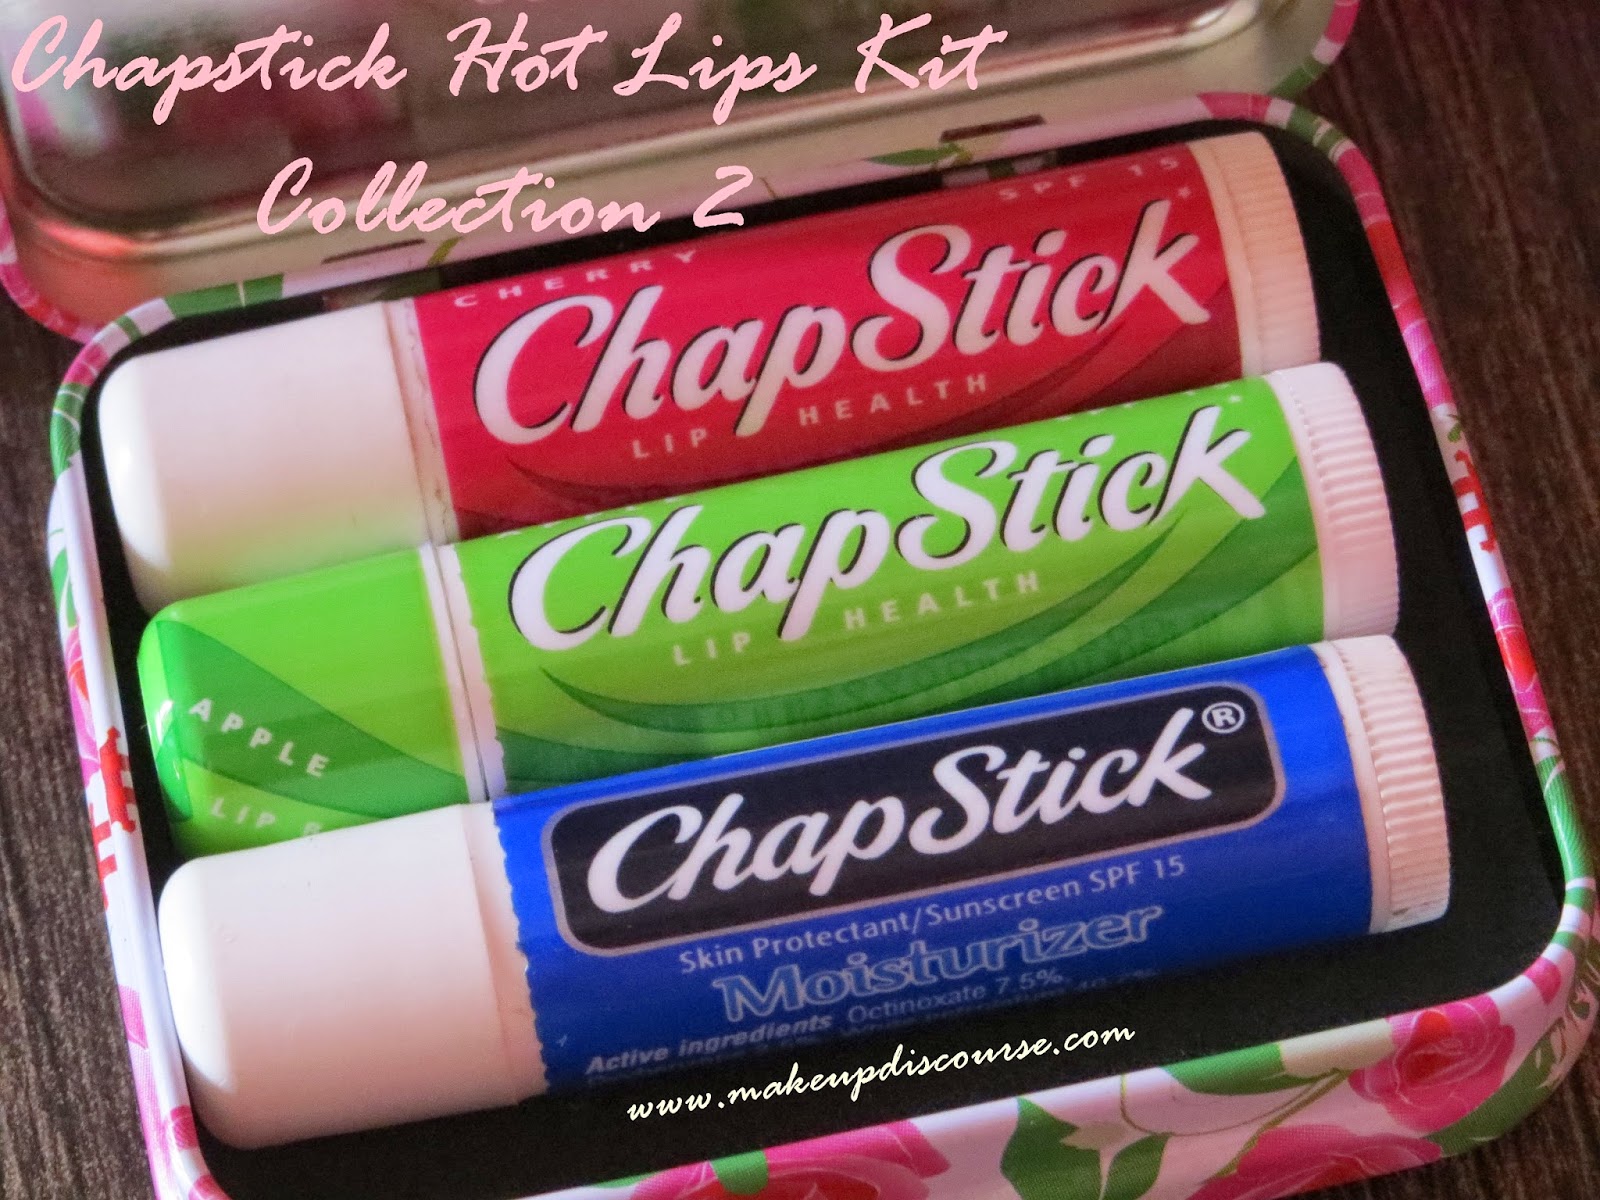 Chapstick in India, Chapstick in Cherry, Classic, Green Apple and Strawberry flavours